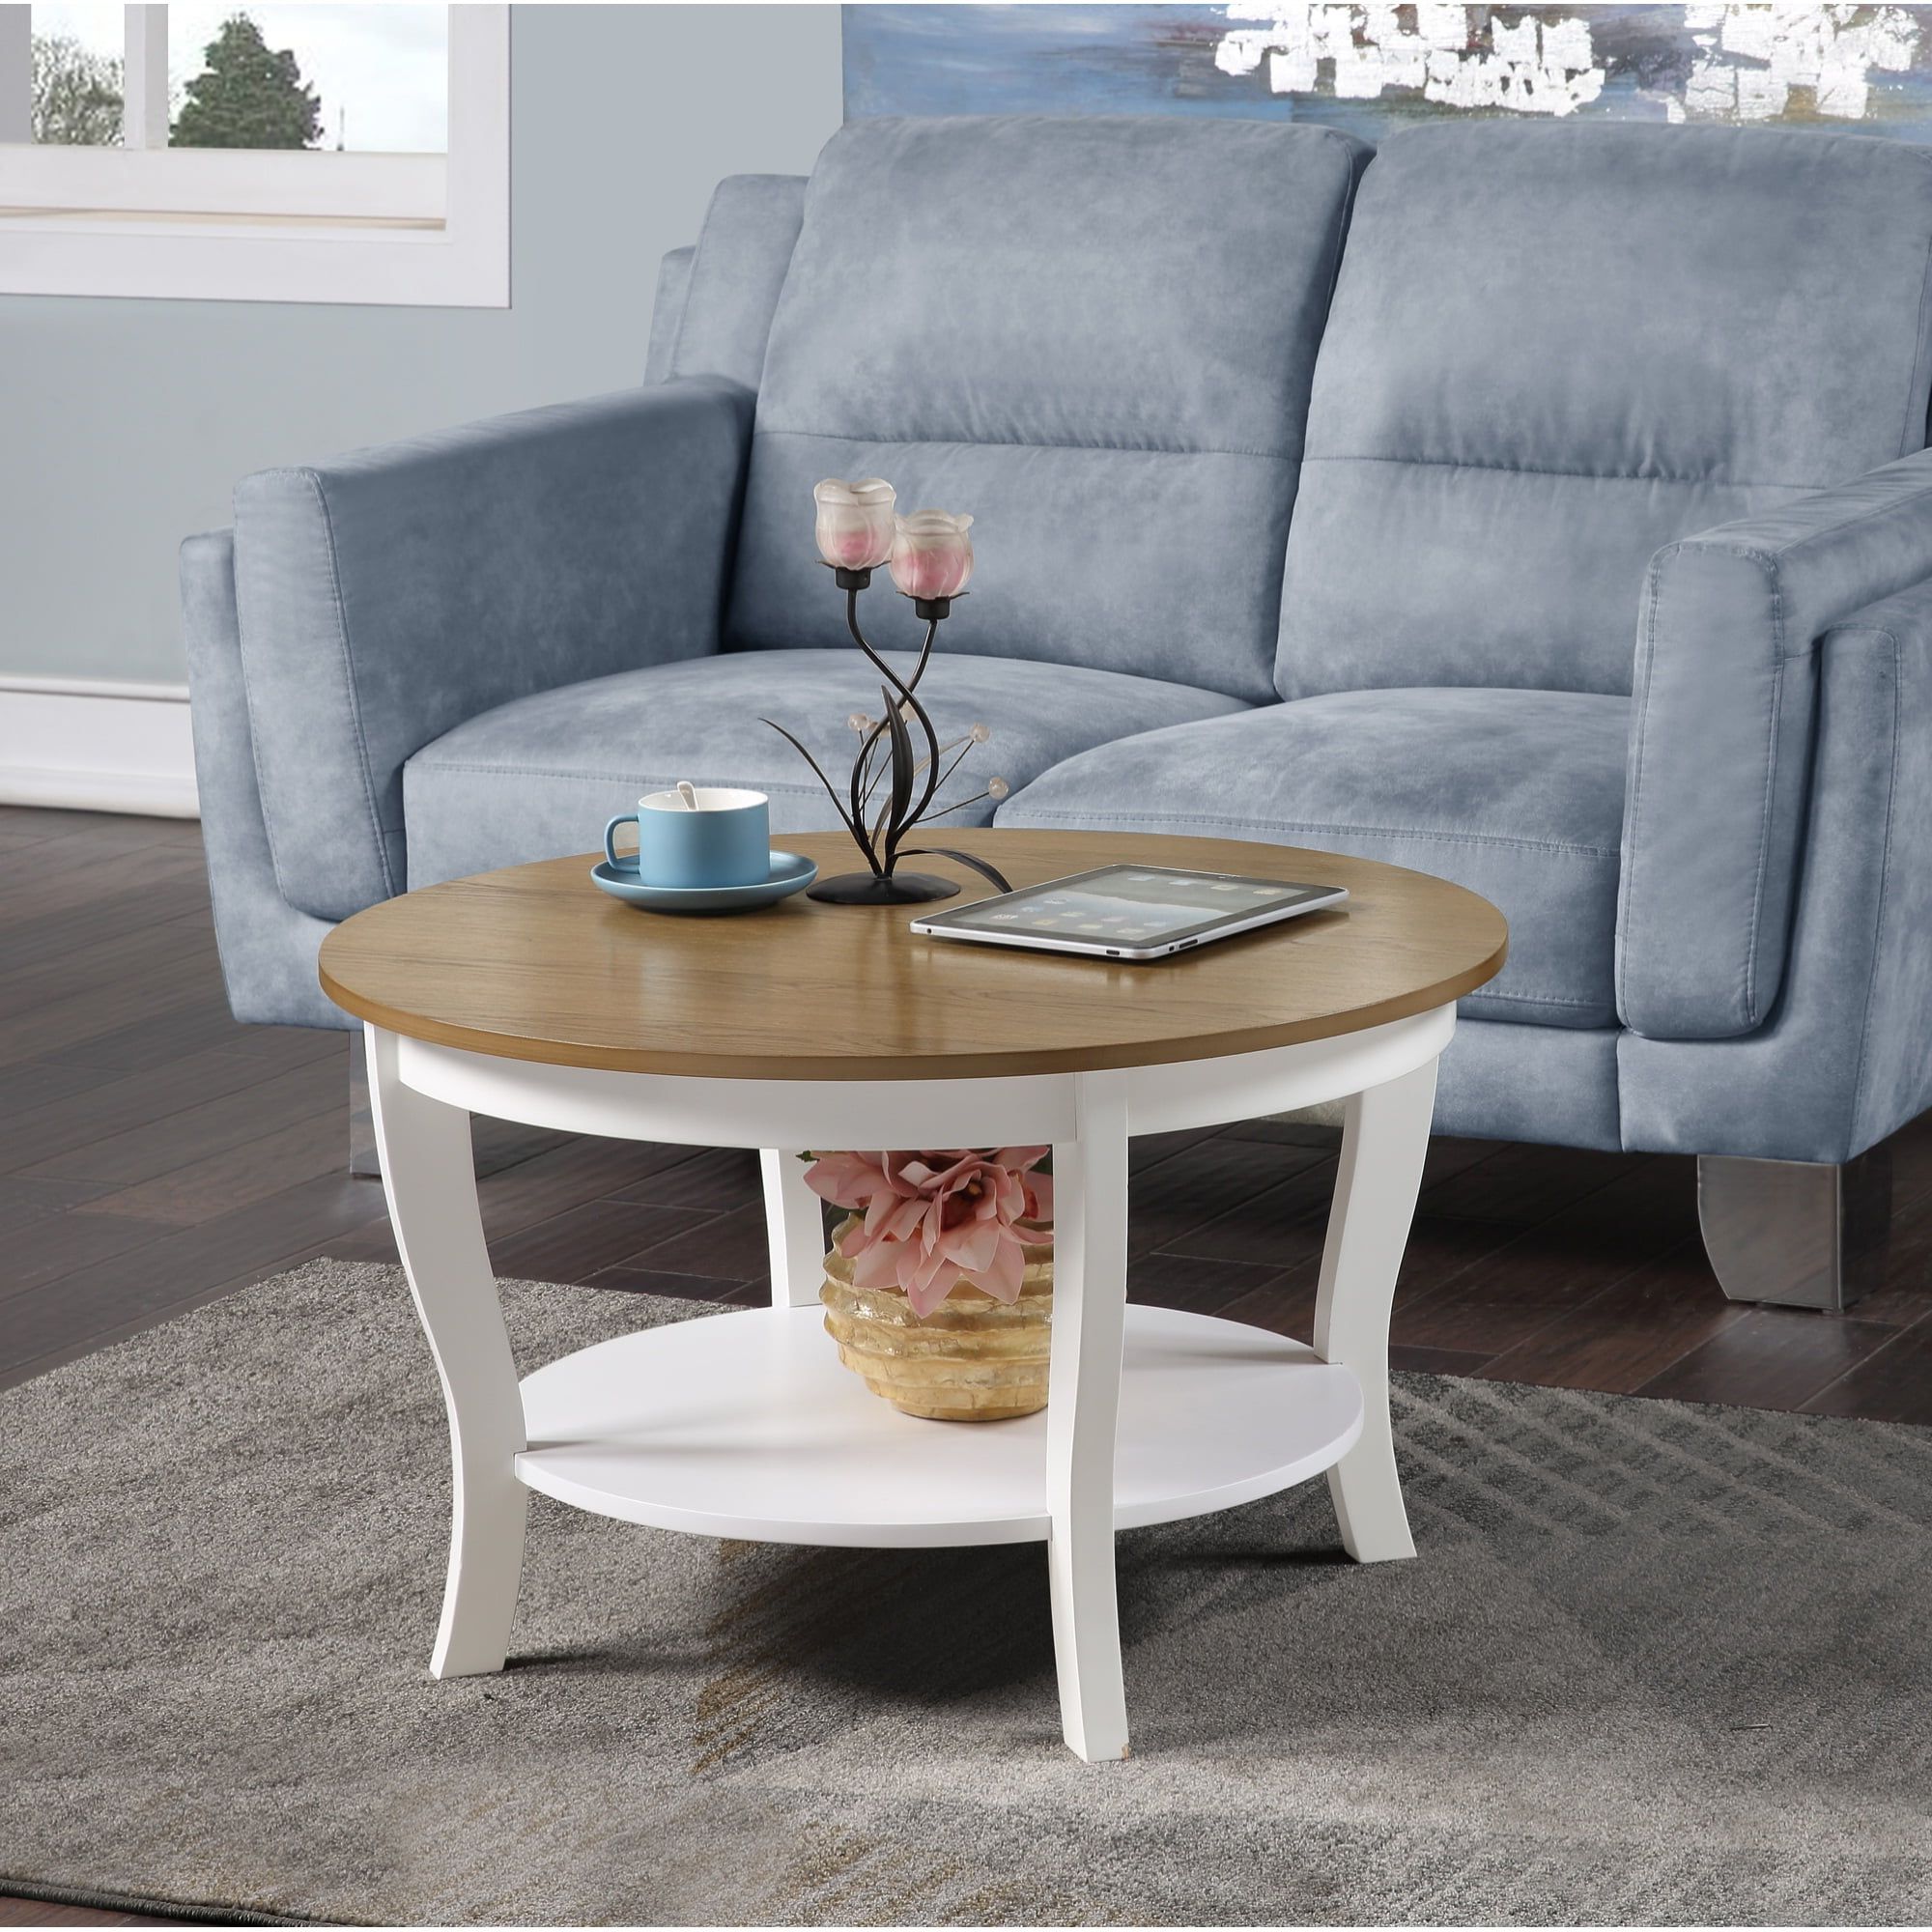 American Heritage Round Coffee Tables Regarding Best And Newest Convenience Concepts American Heritage Round Coffee Table With Shelf,  Driftwood/white – Walmart (Photo 5 of 10)